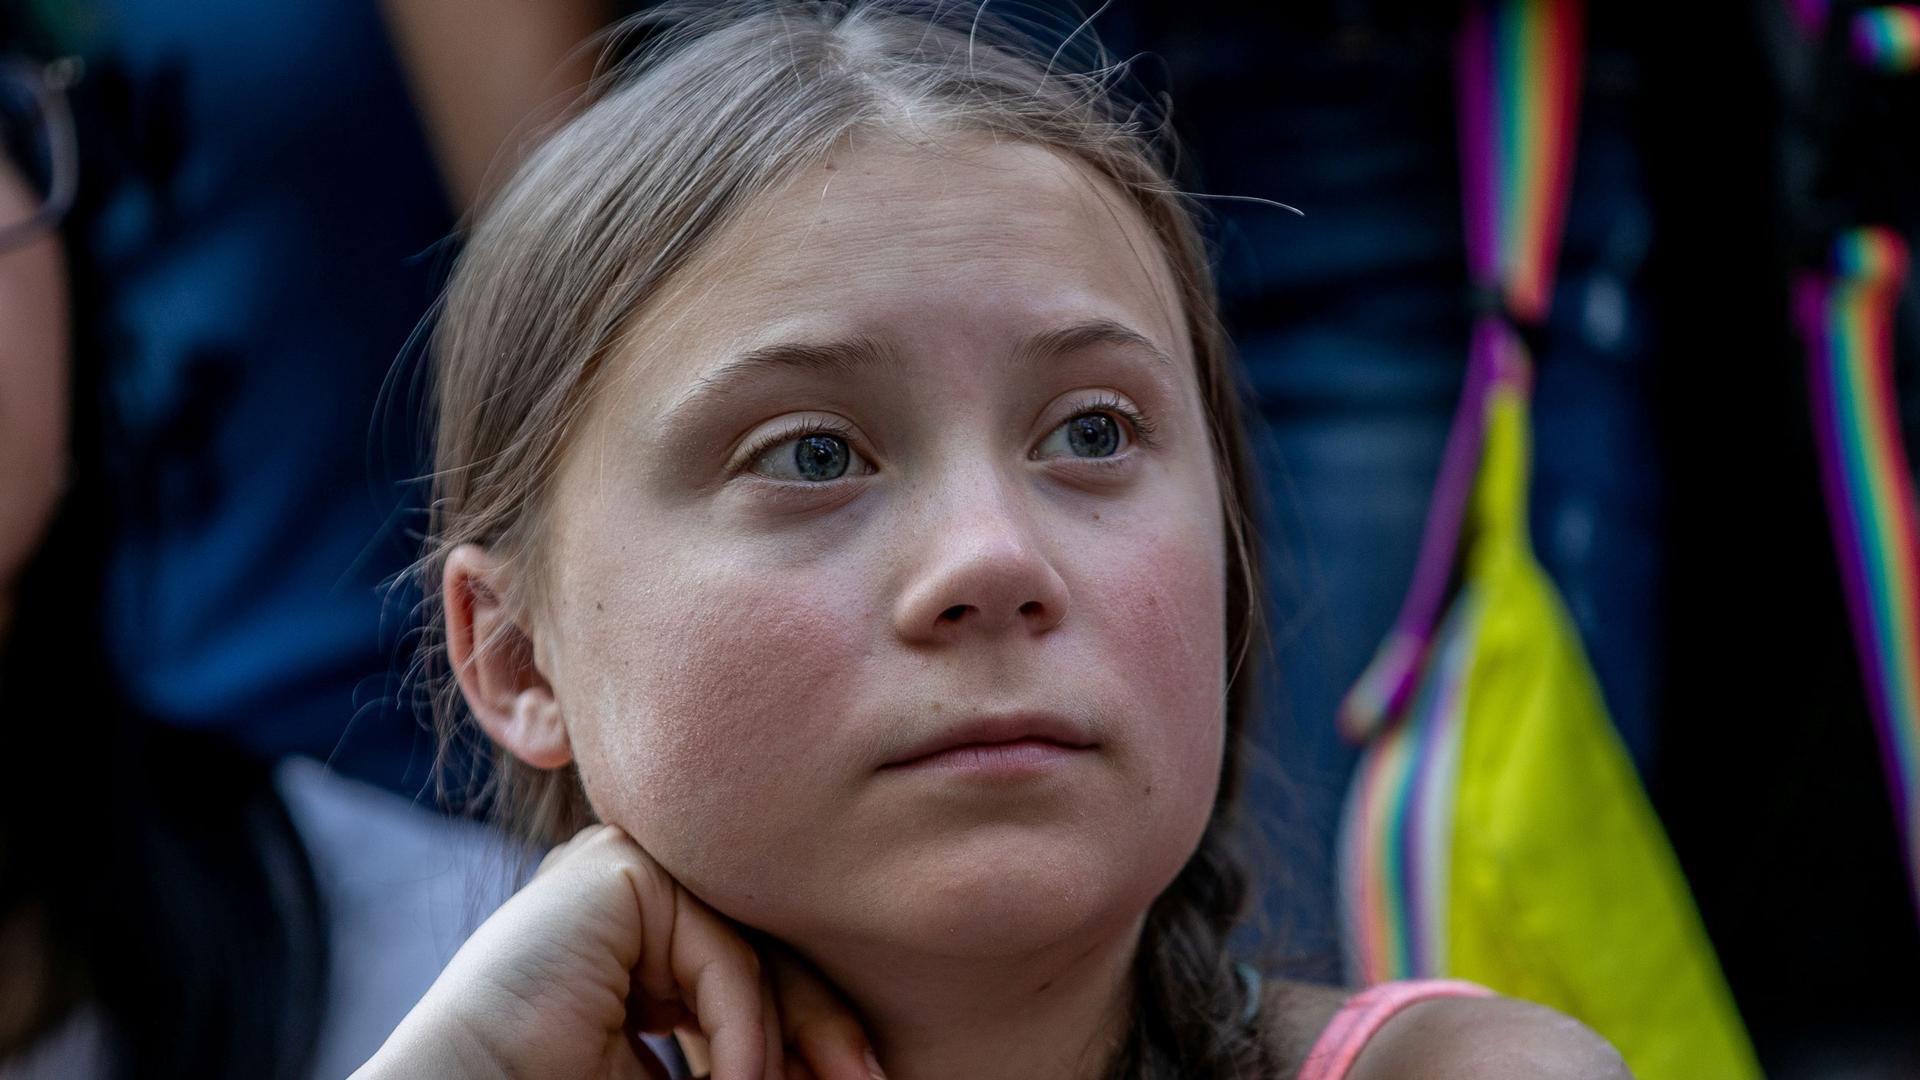 Swedish activist Greta Thunberg participates in a youth climate change protest in front of the United Nations Headquarters in Manhattan, New York City, New York, US, on Aug. 30, 2019. 